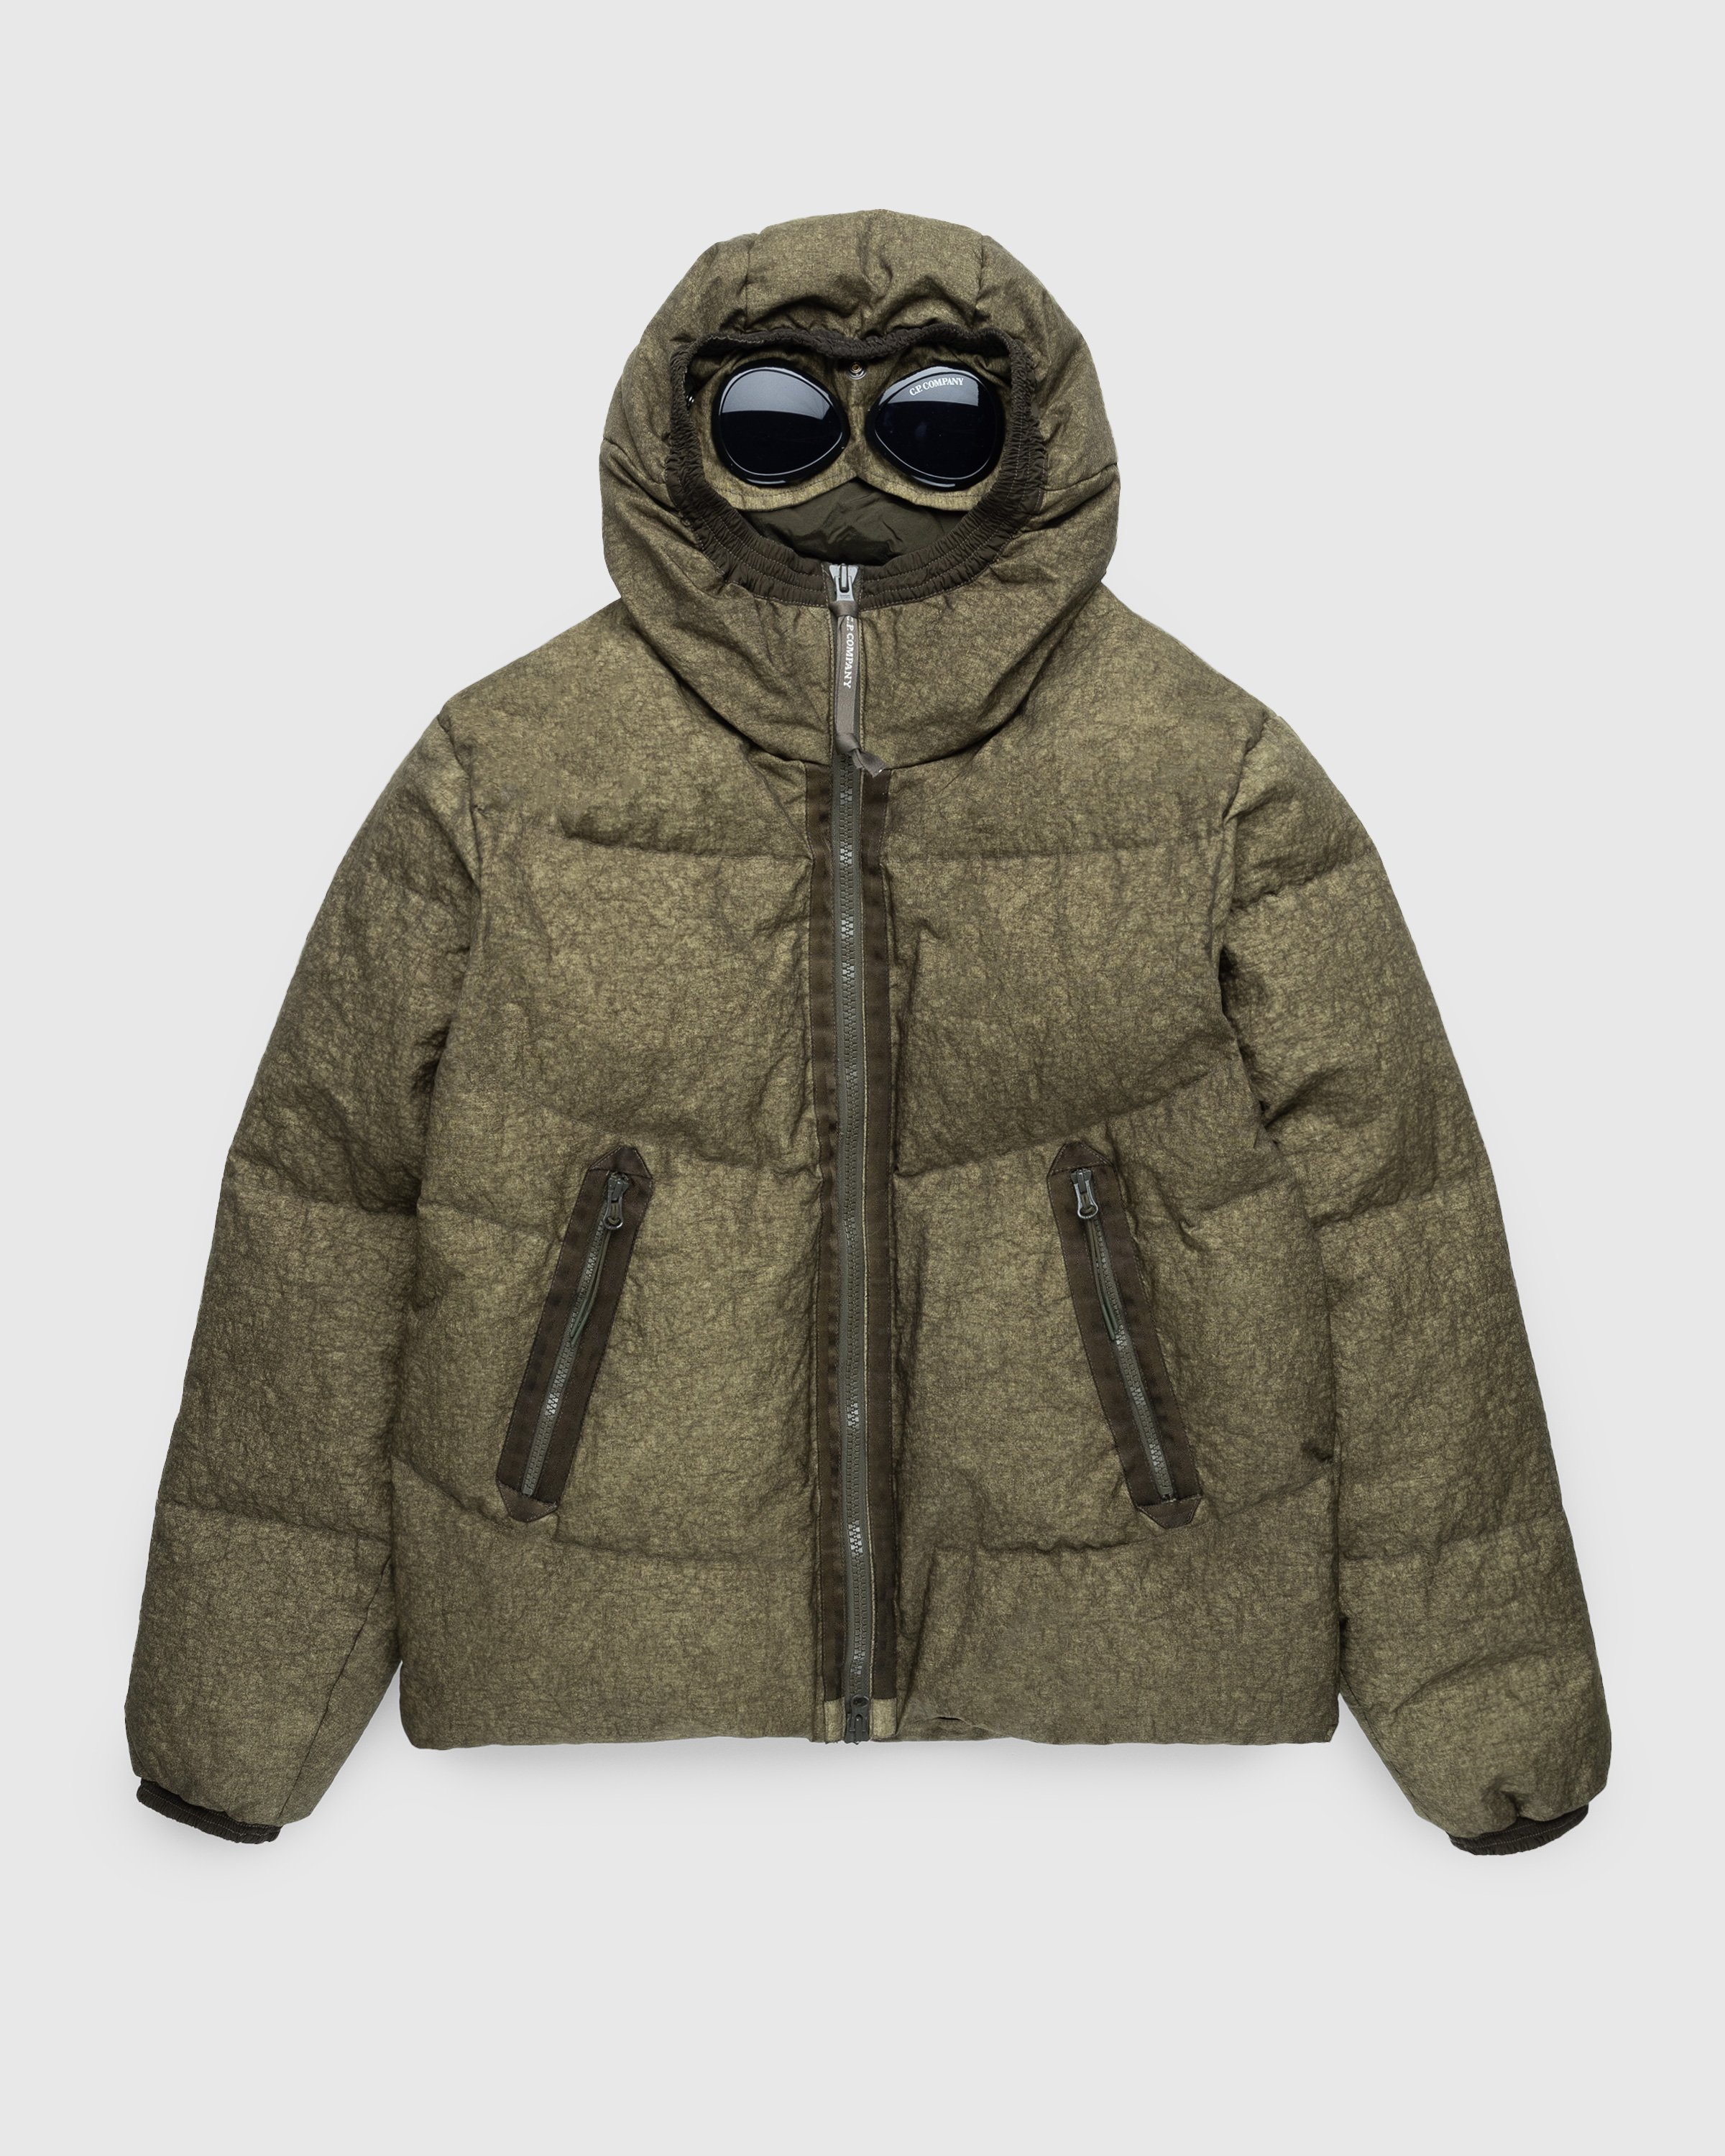 C.P. Company – Co-Ted Goggle Down Jacket Ivy Green | Highsnobiety Shop